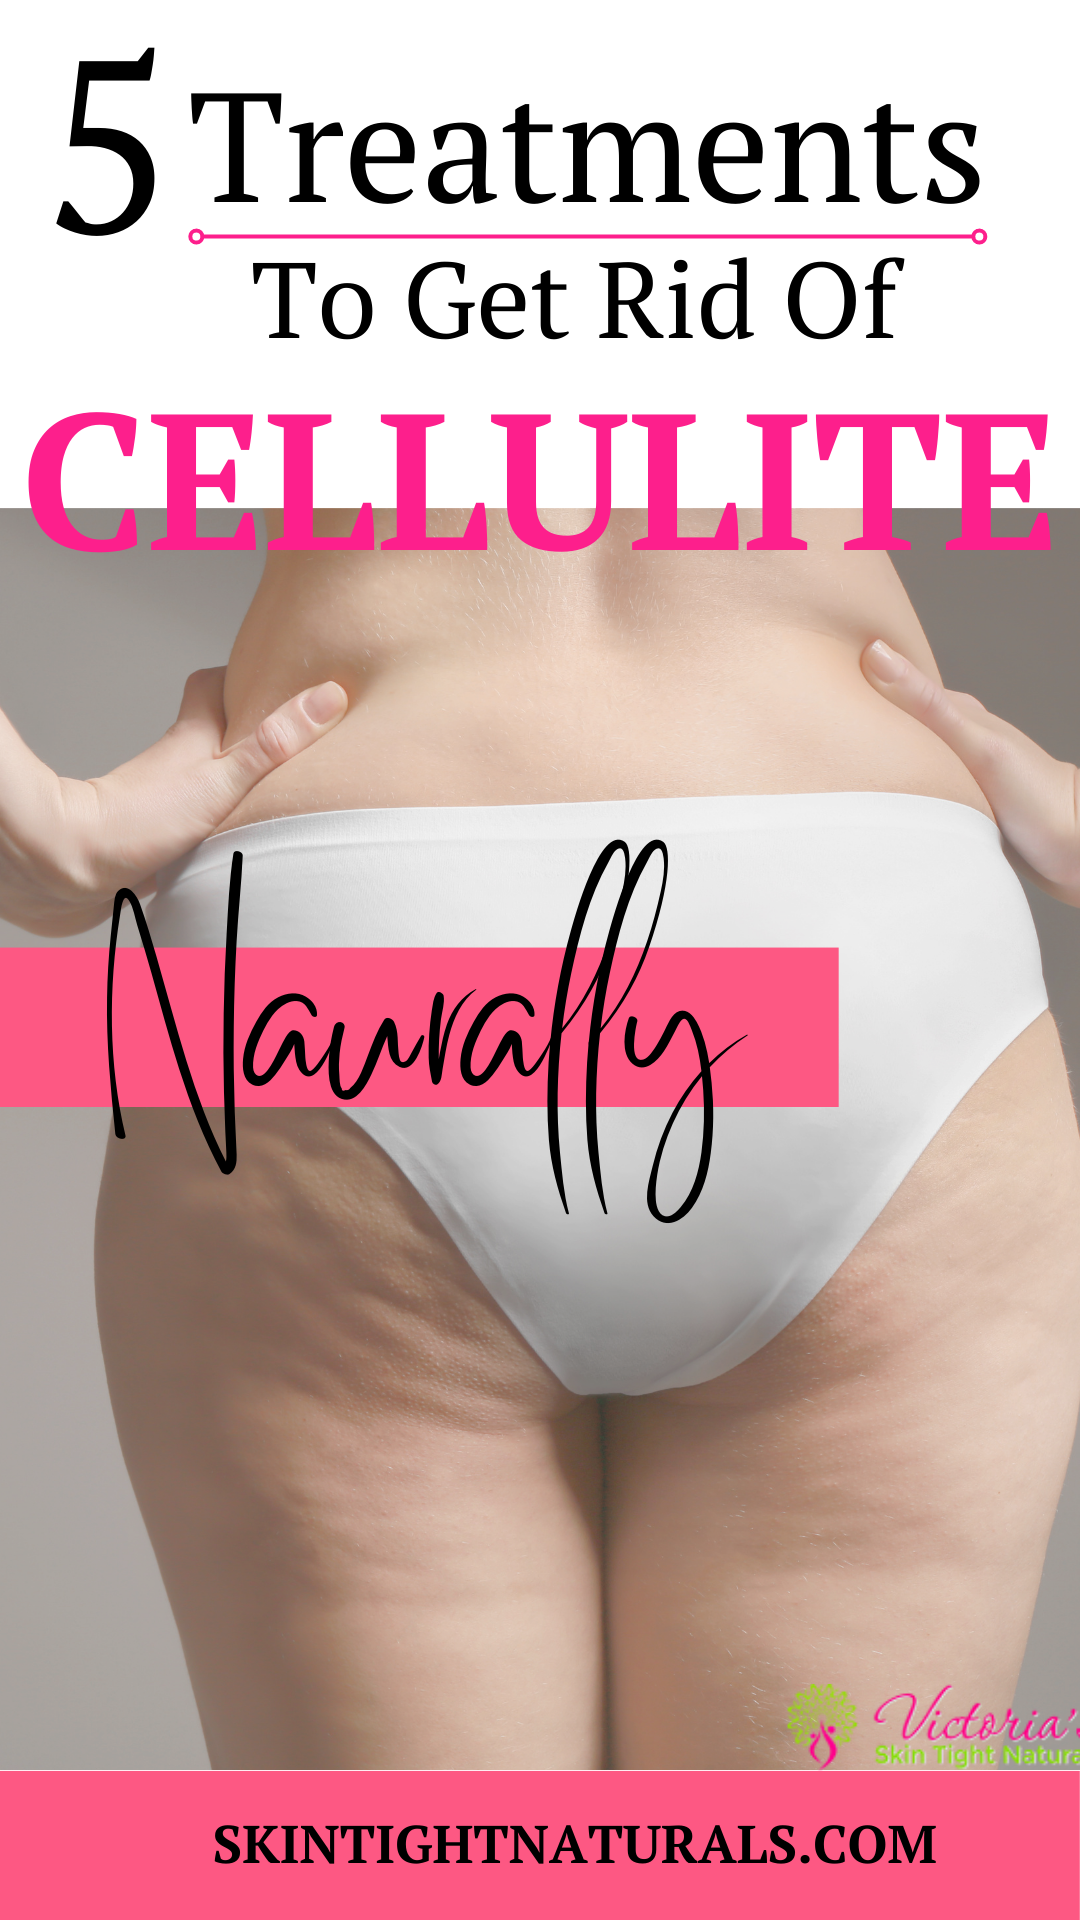 5 Popular Cellulite Treatments You May Want To Check Out